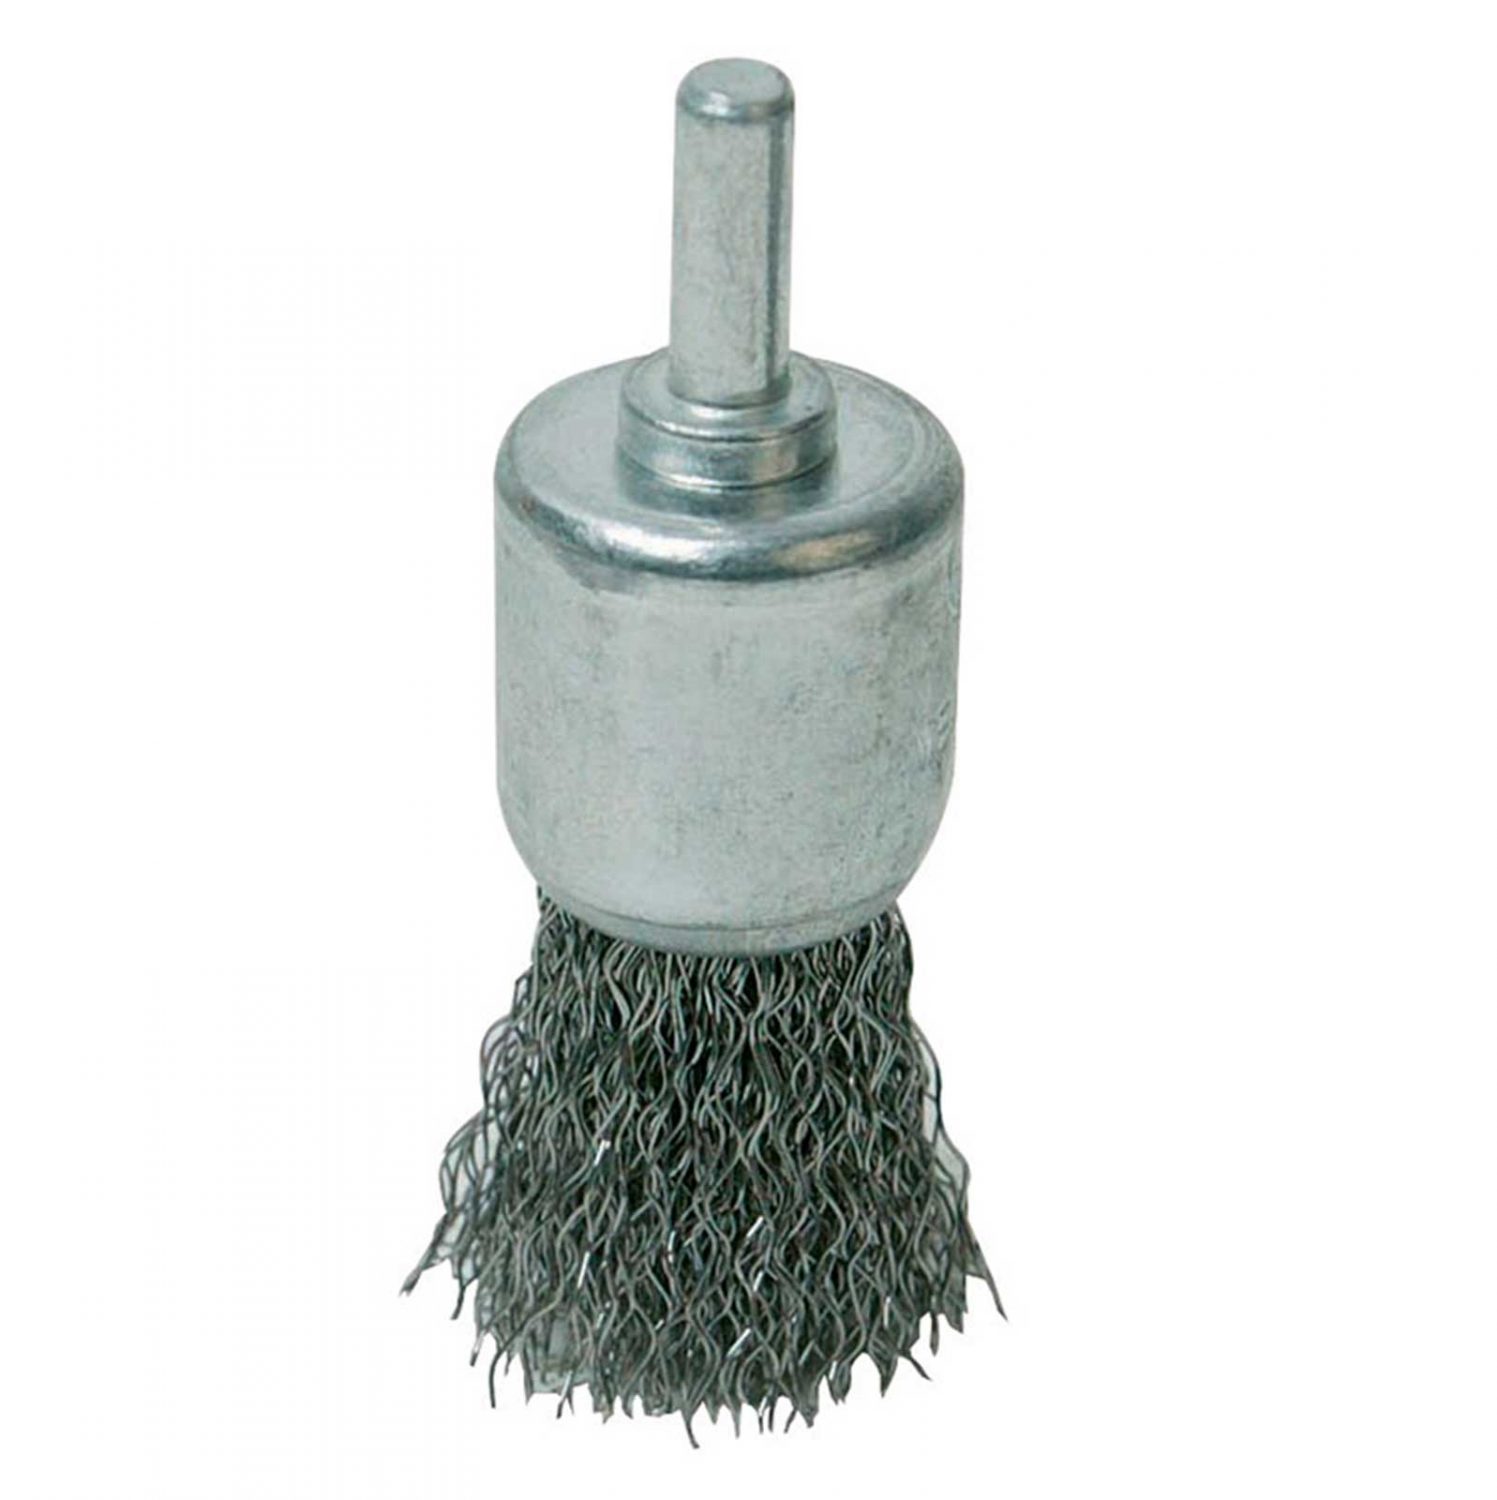 STEEL WIRE END BRUSH - Rustbuster